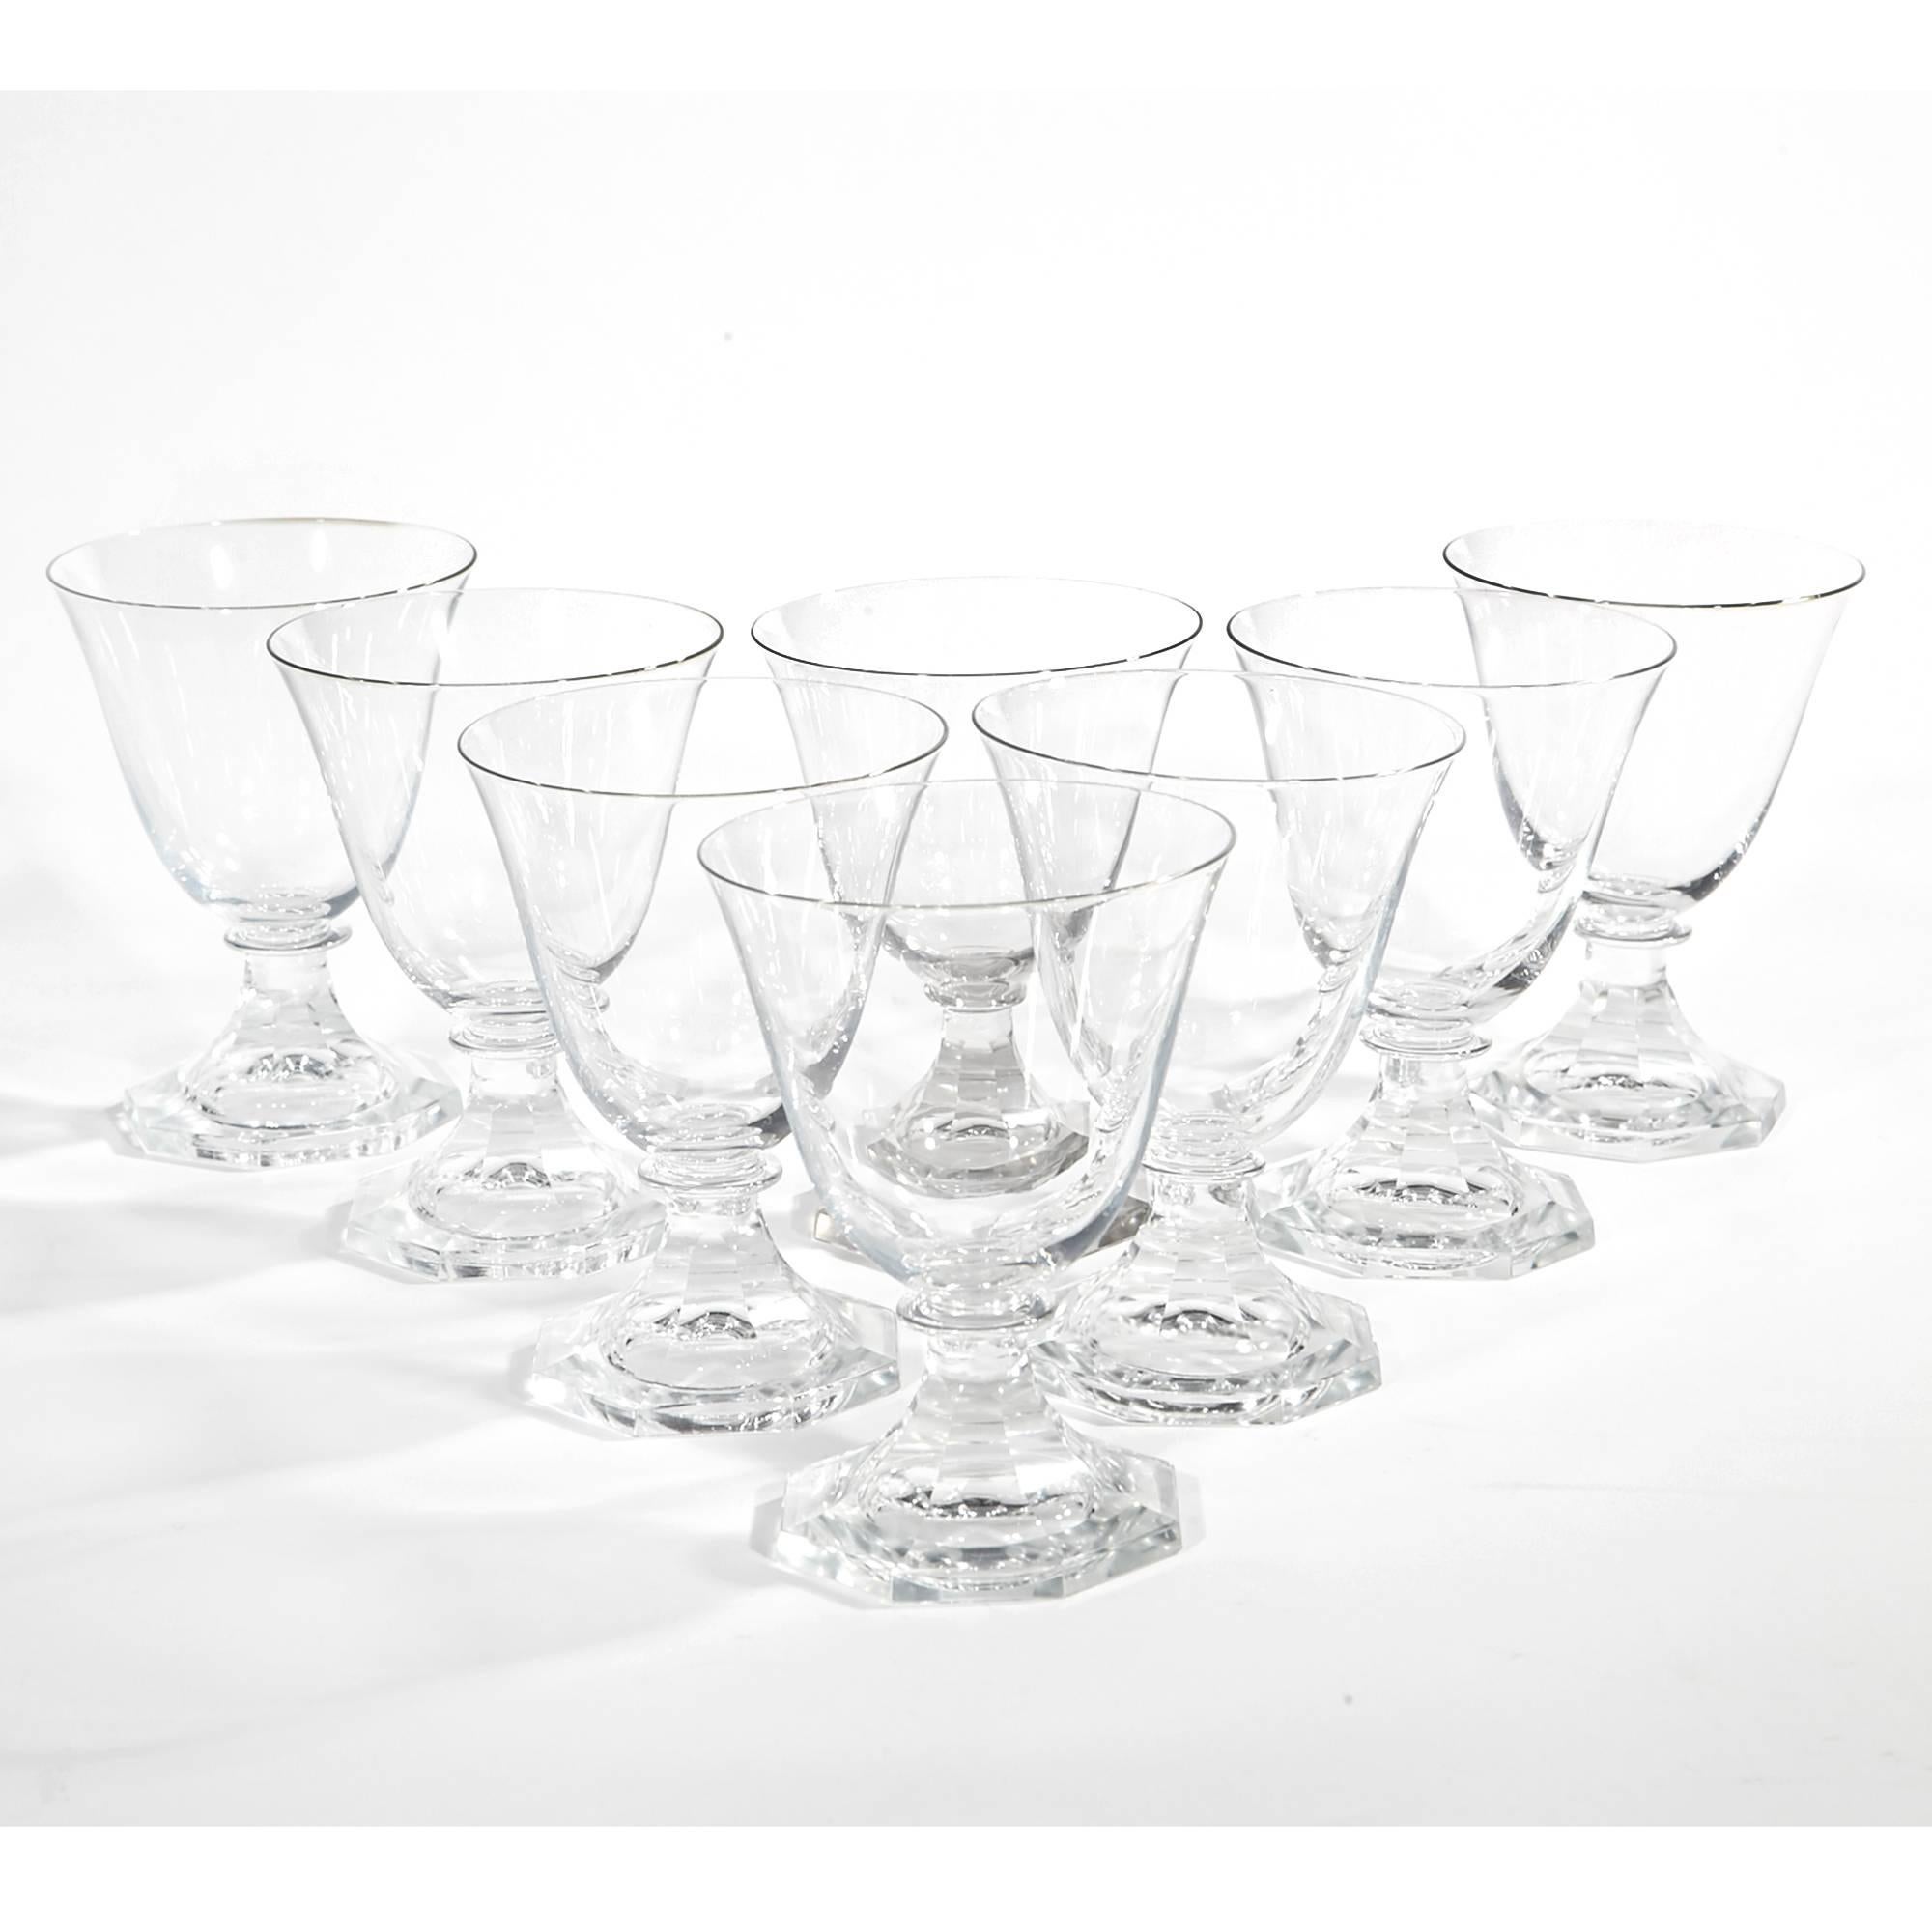 Orrefors Crystal Stems in the Seaford Pattern, 45 Pieces For Sale 2